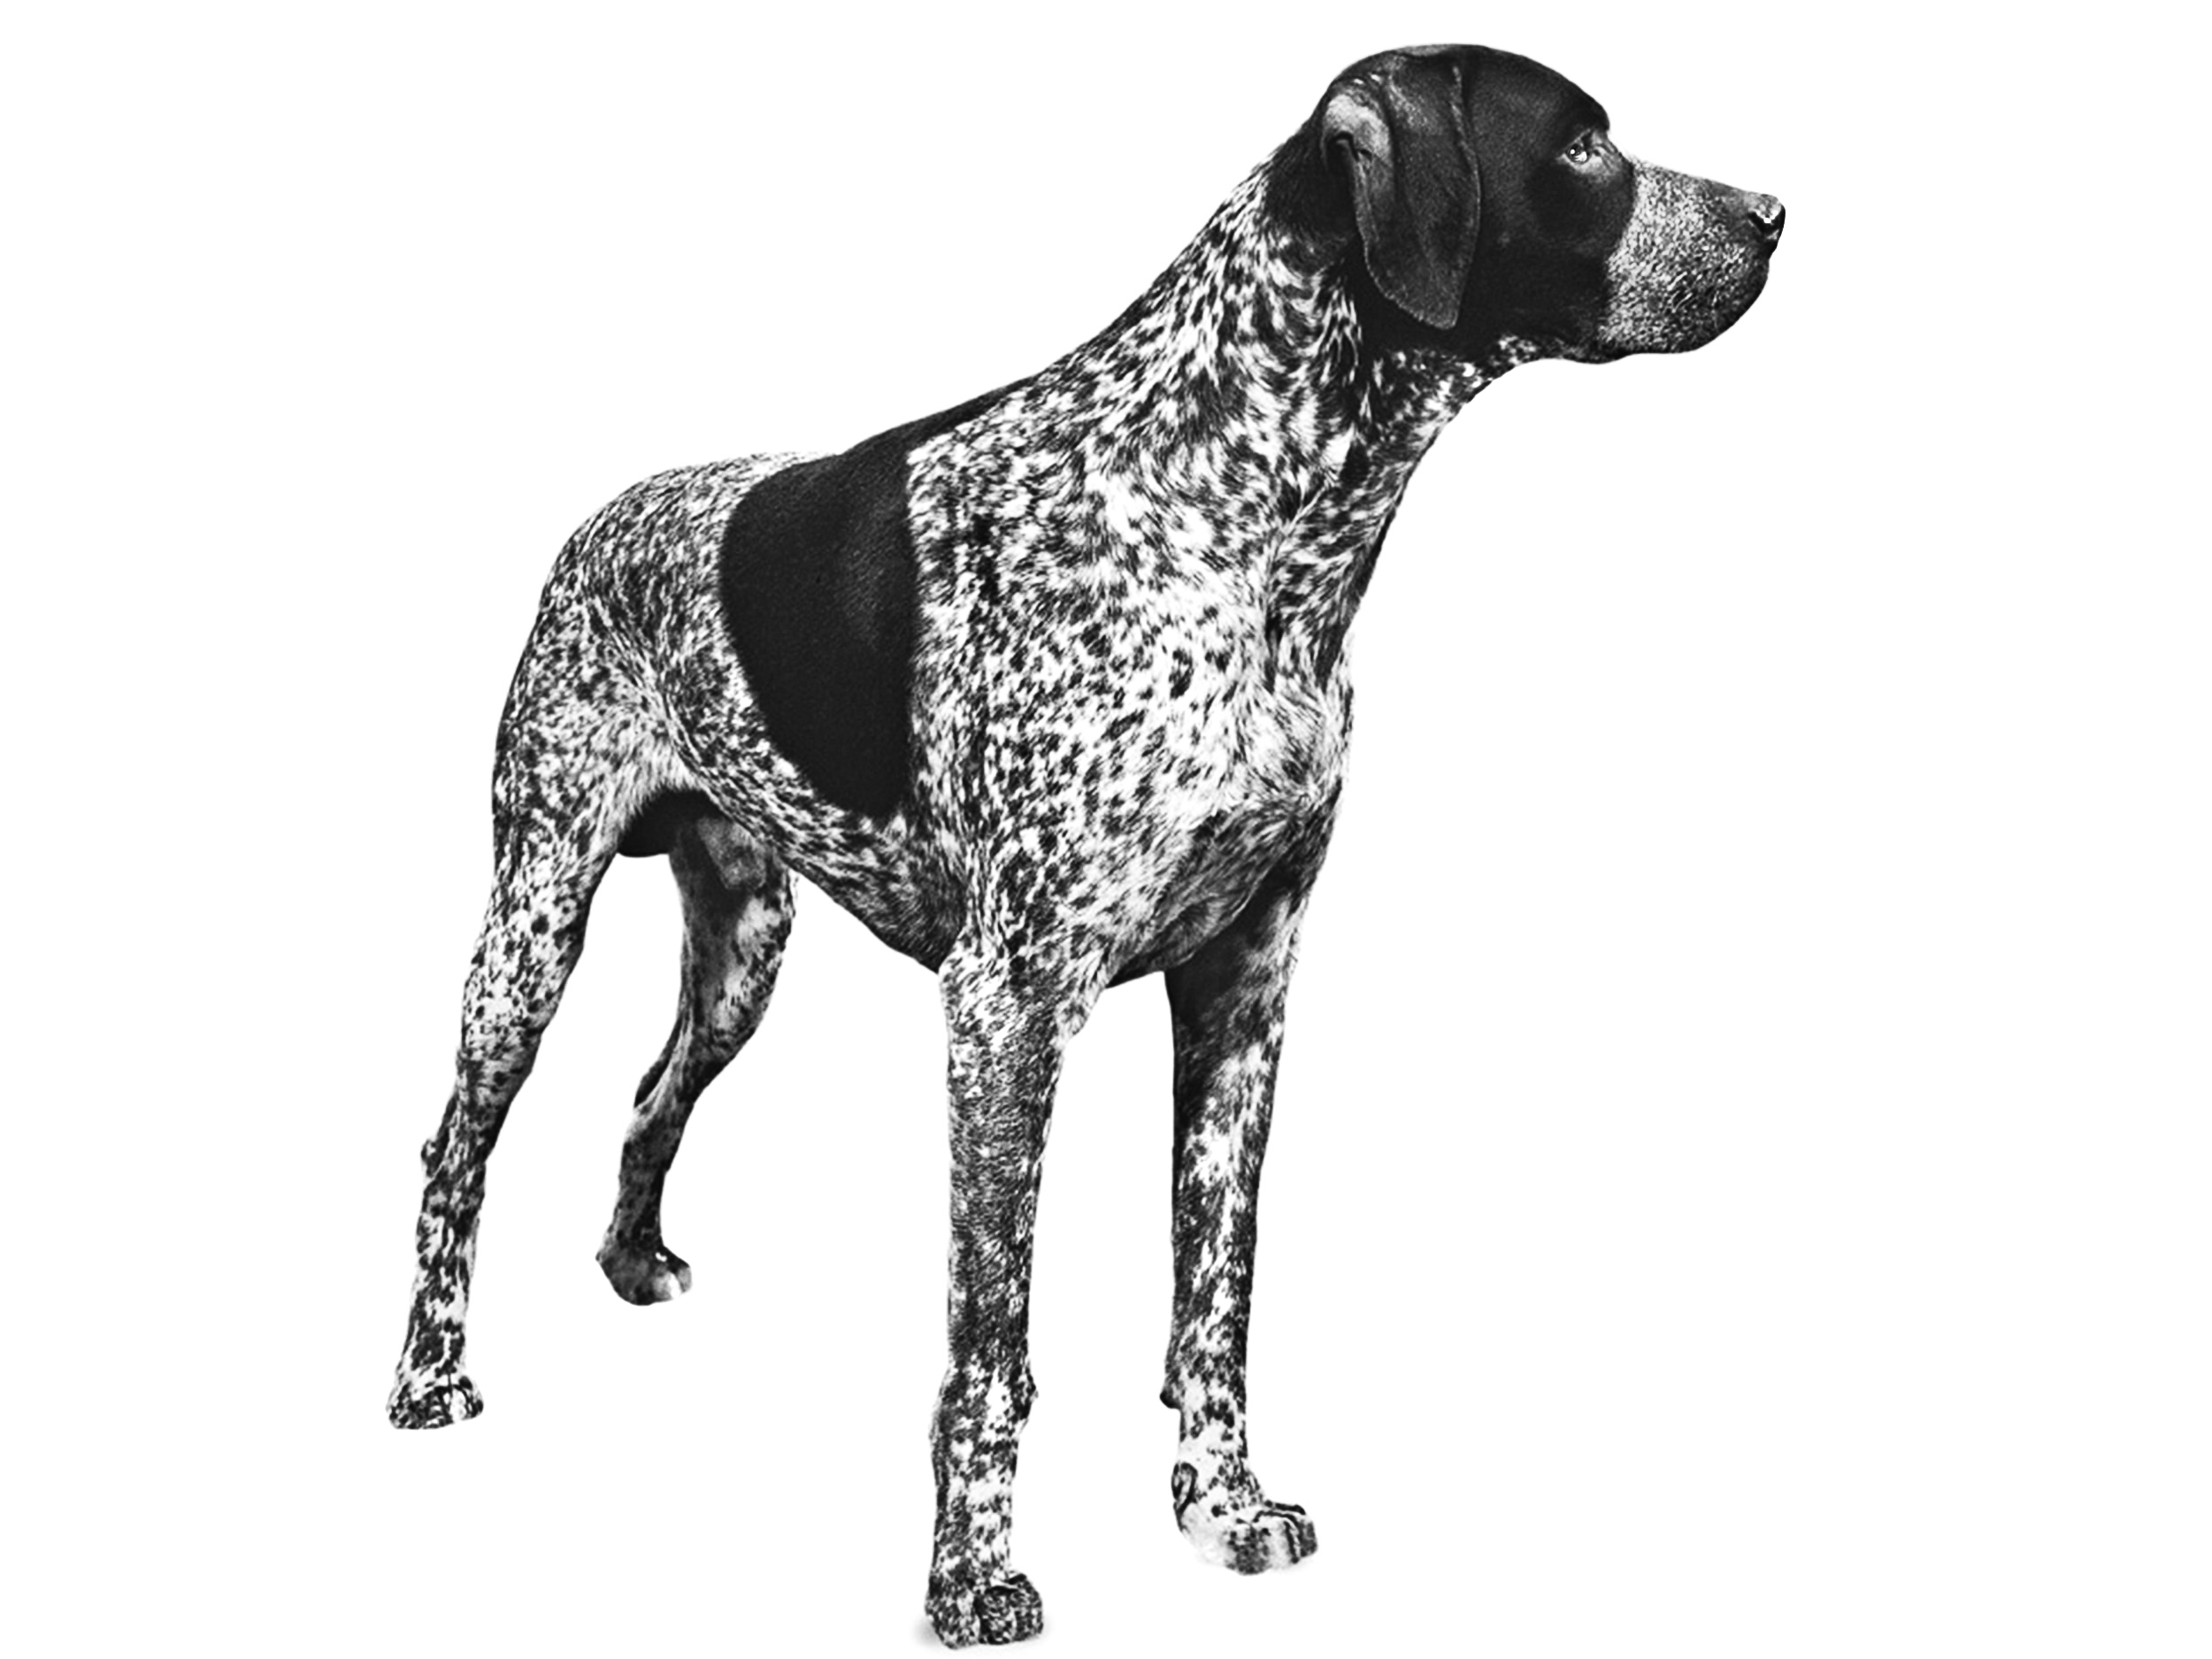 French Pointing Dog - Gascogne type adult black and white